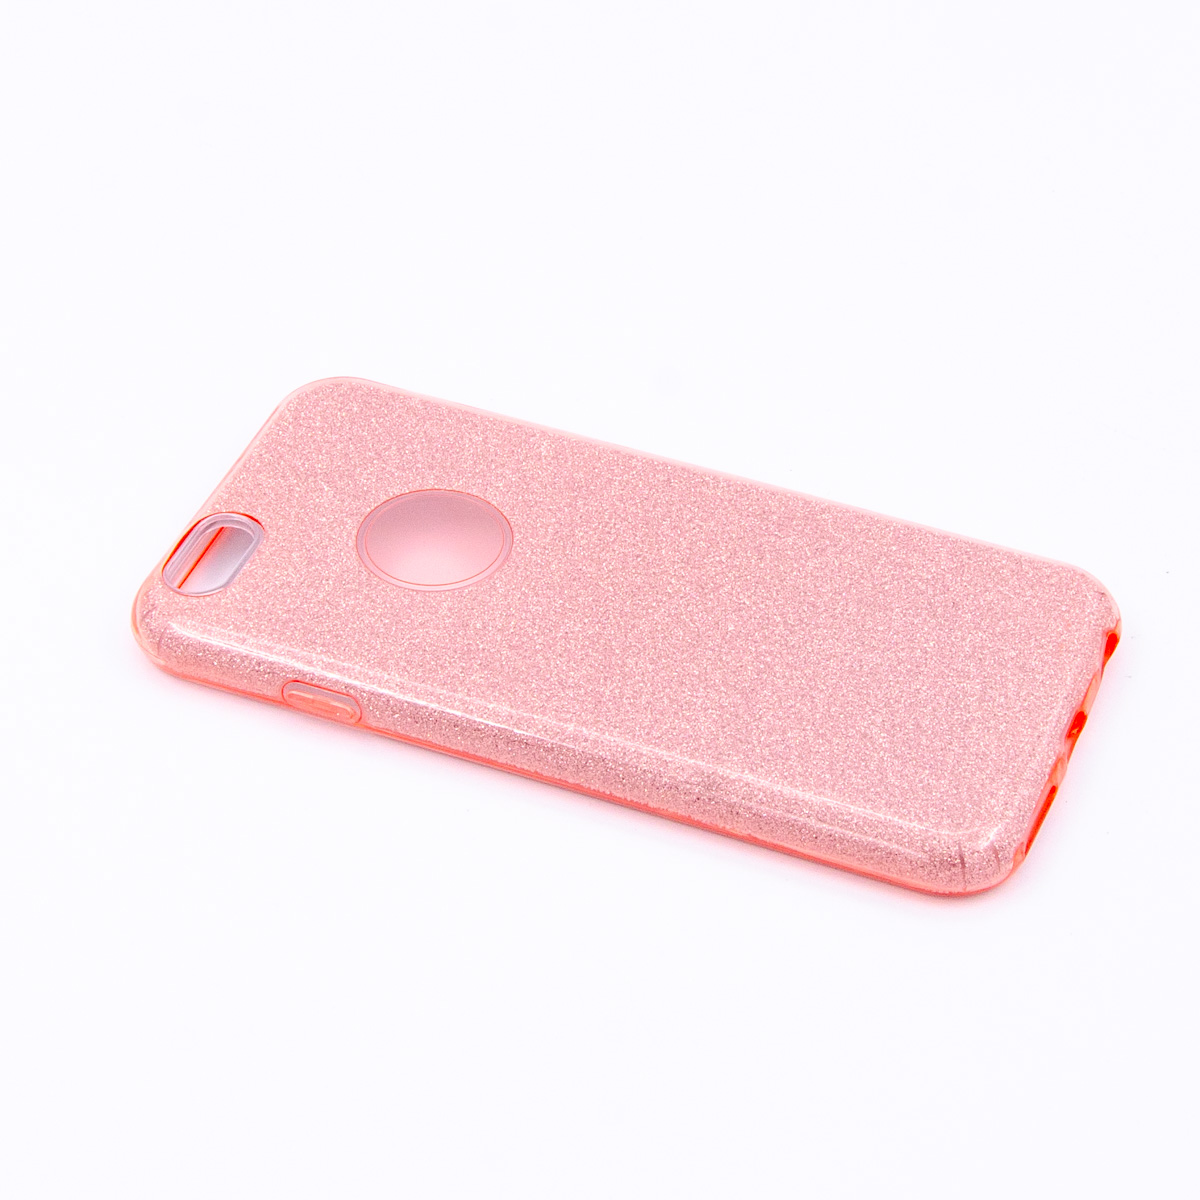 Tpu sparkly shine for iphone 6 (4.7") pink